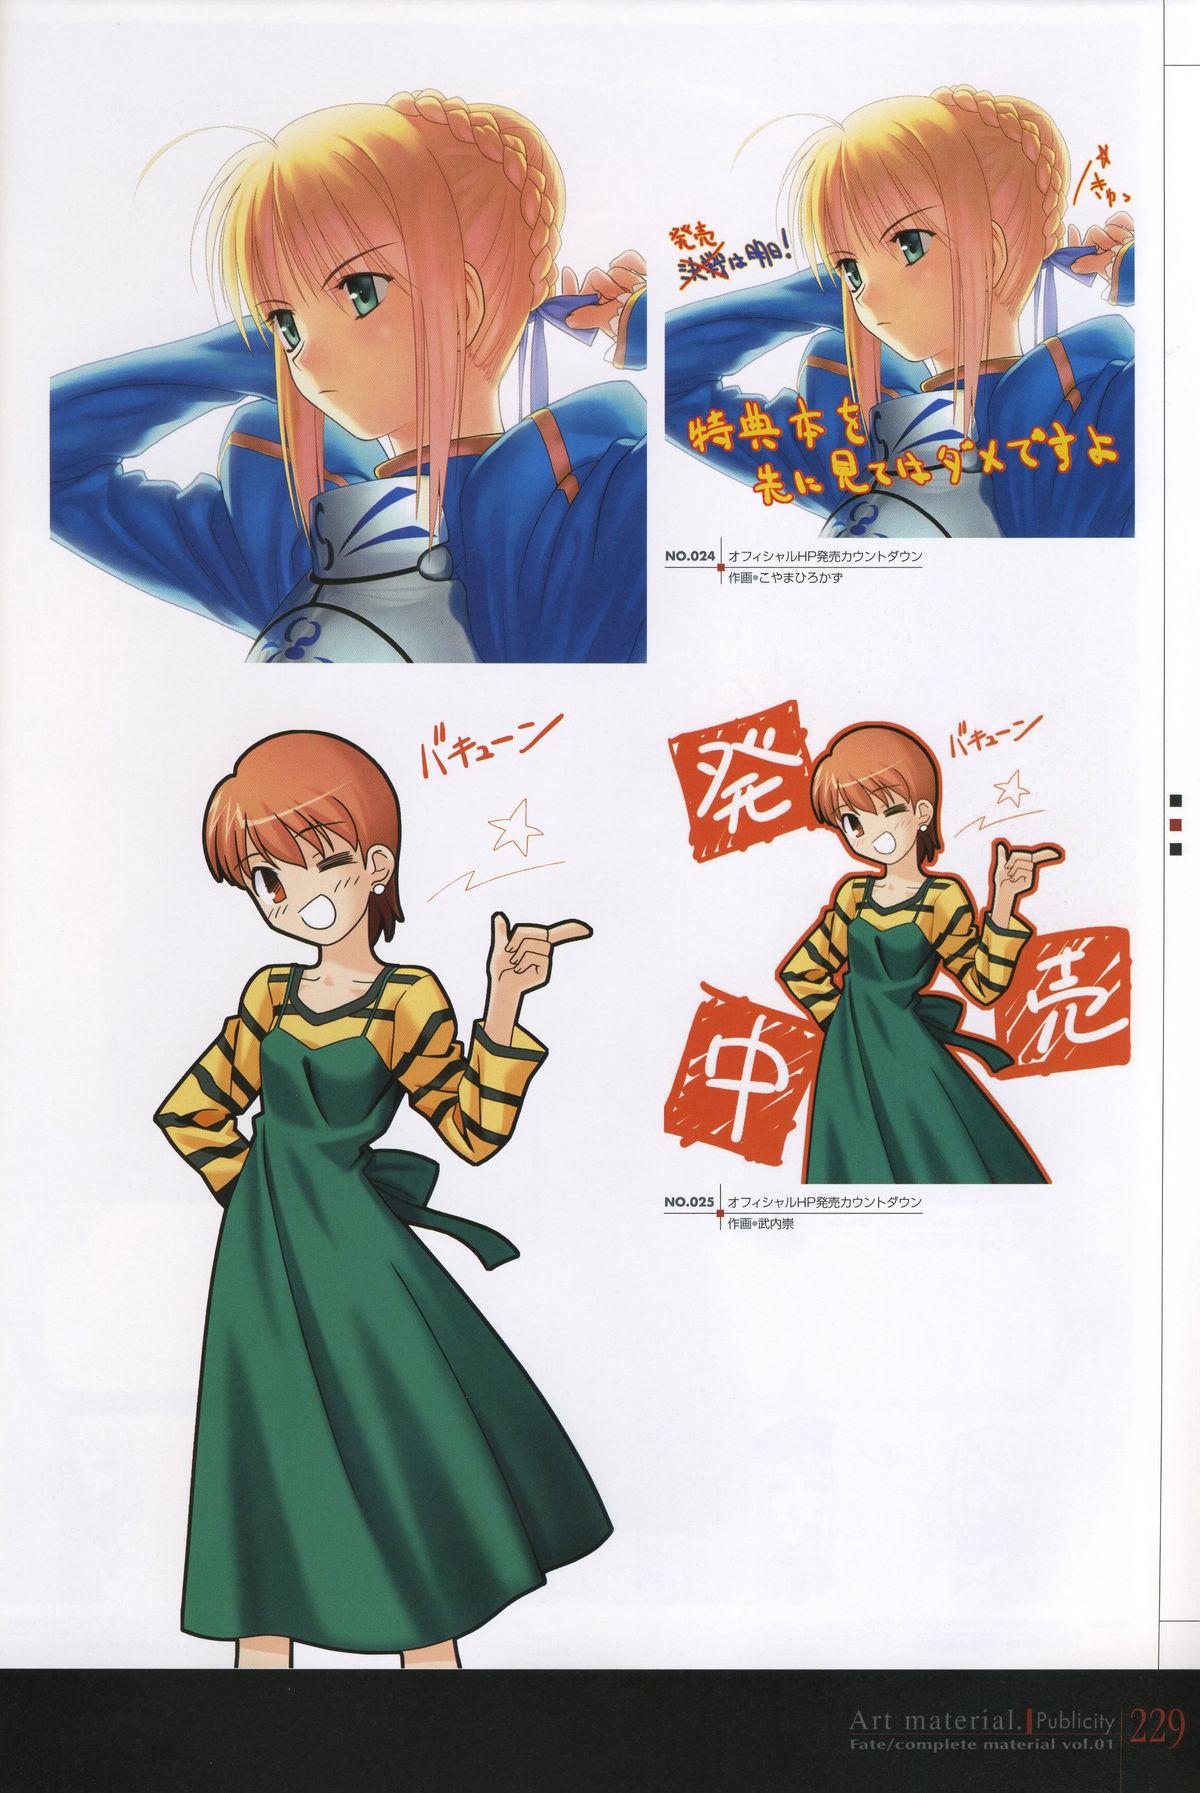 Fate/complete material I - Art material. 233